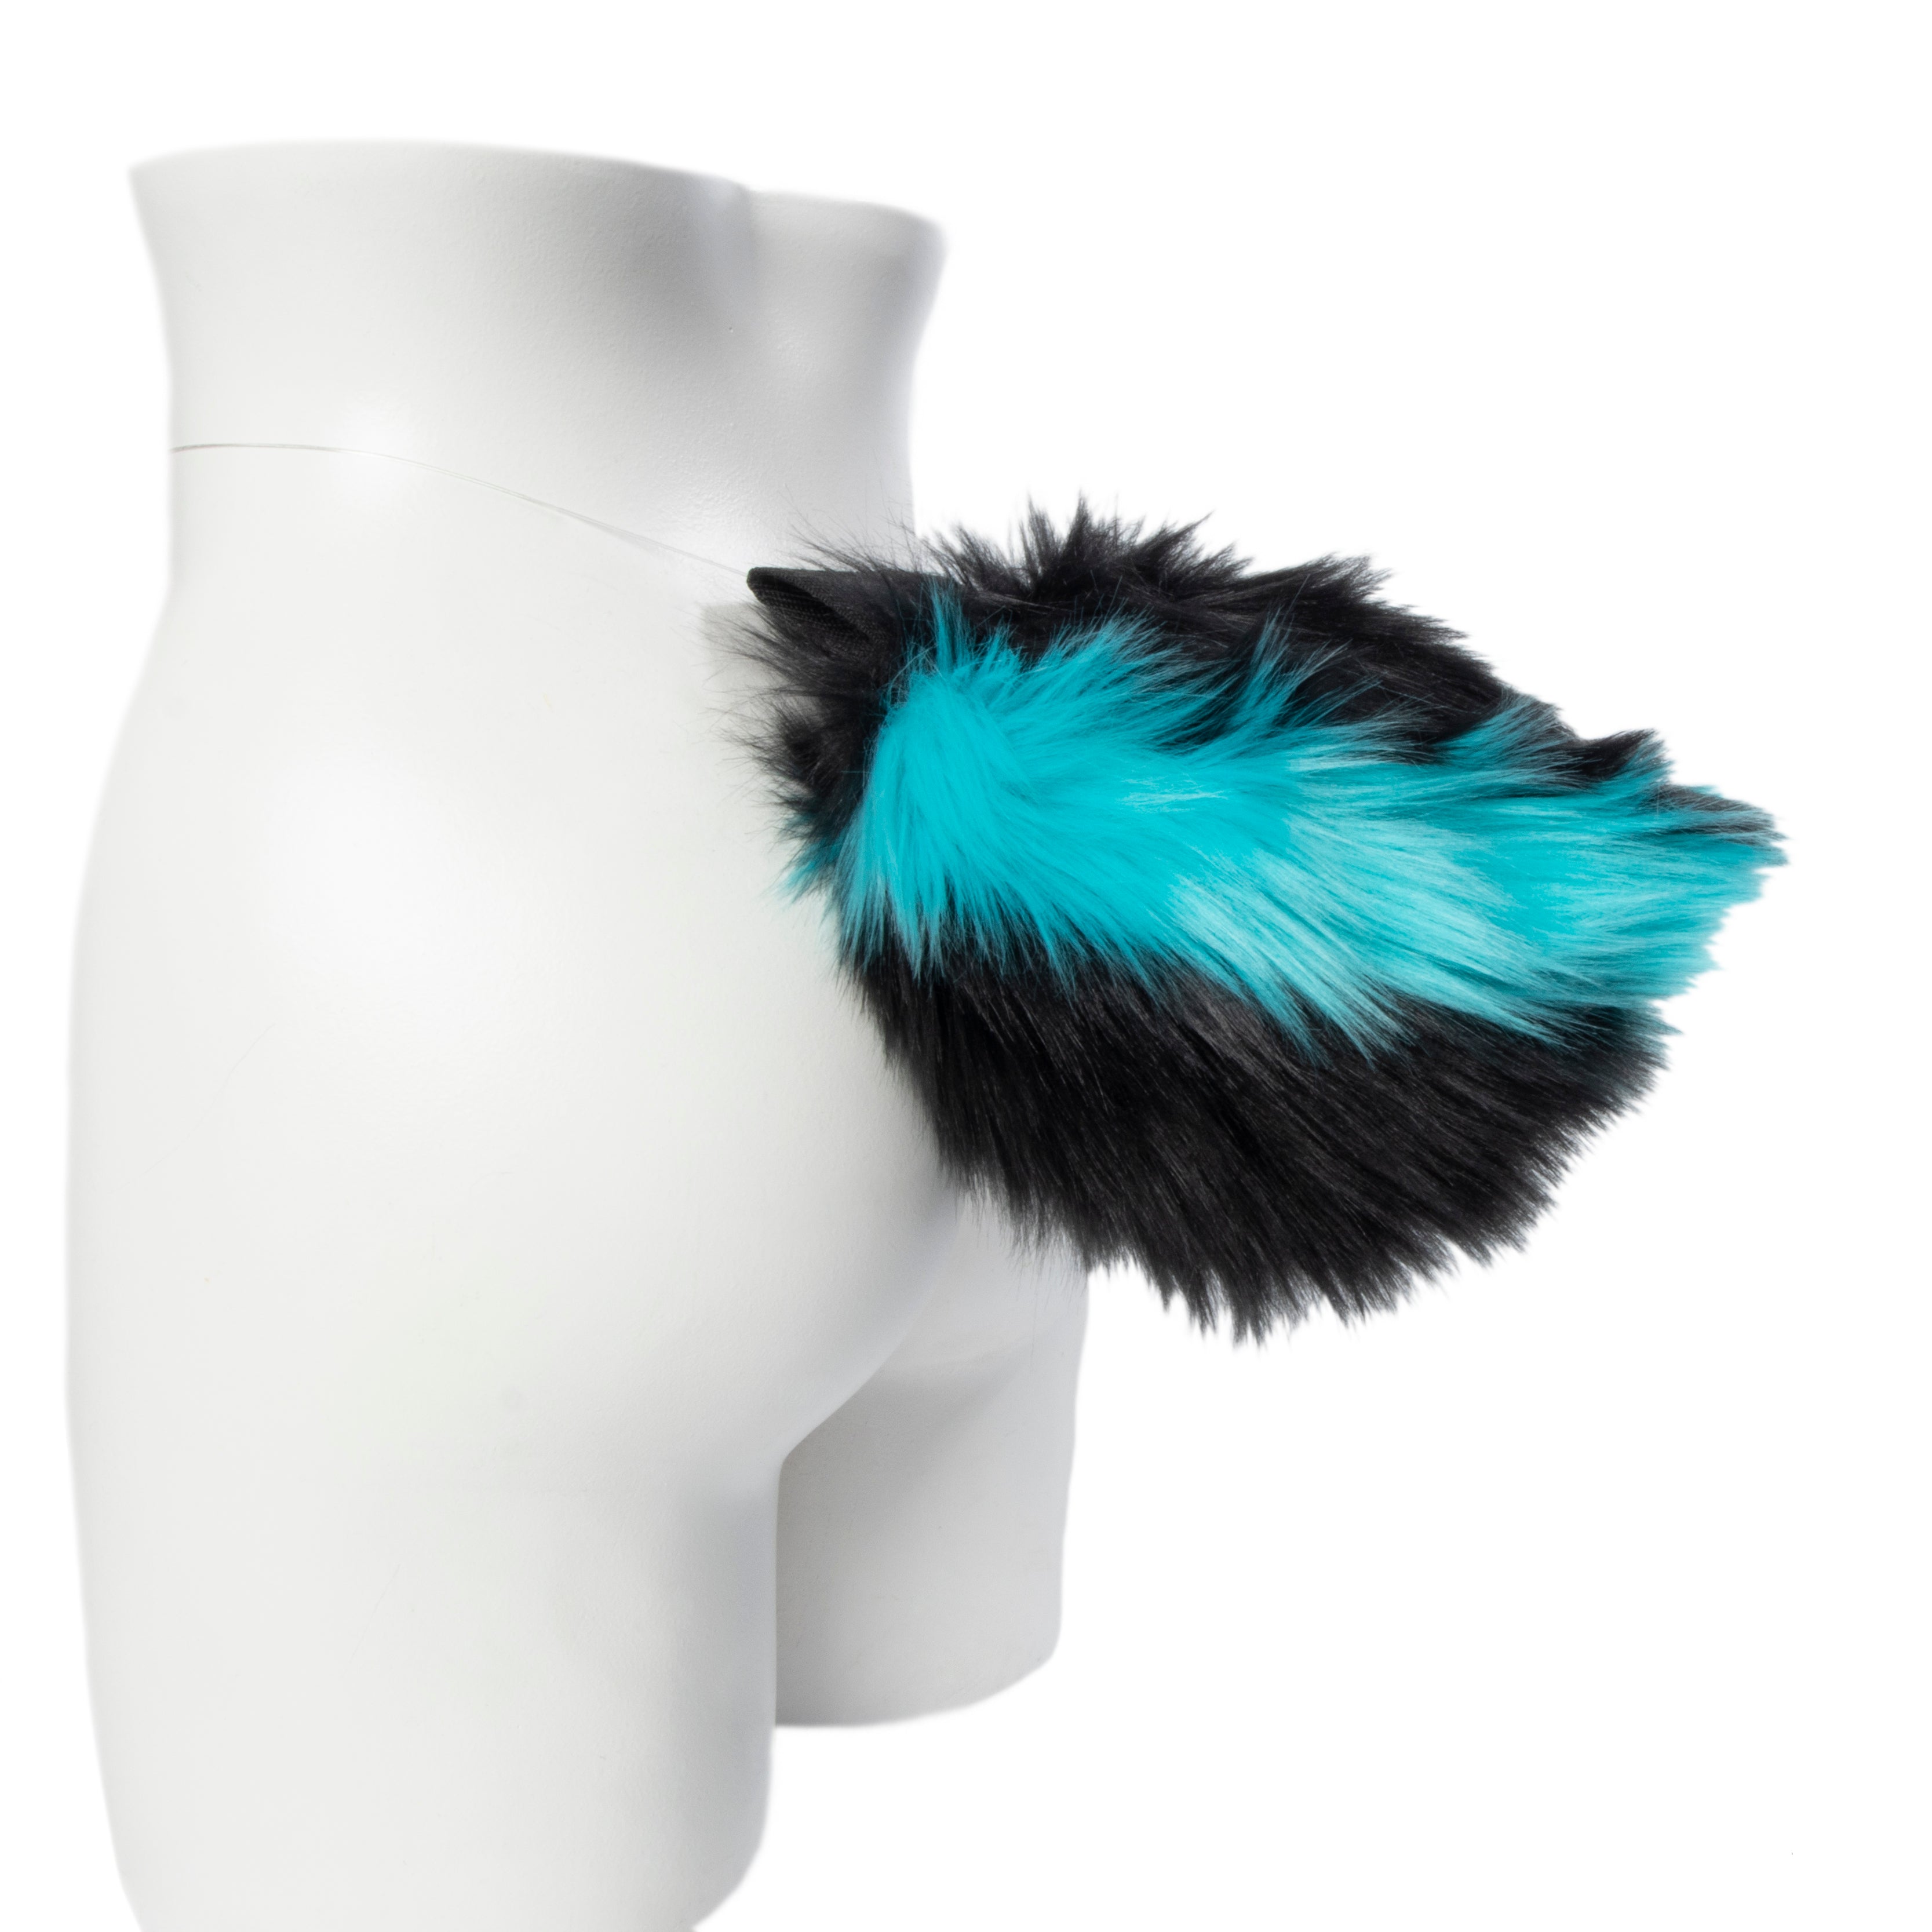 Pawstar Bunny rabbit tail furry fluffy partial fursuit halloween costume or cosplay accessory  in black and  turquoise blue